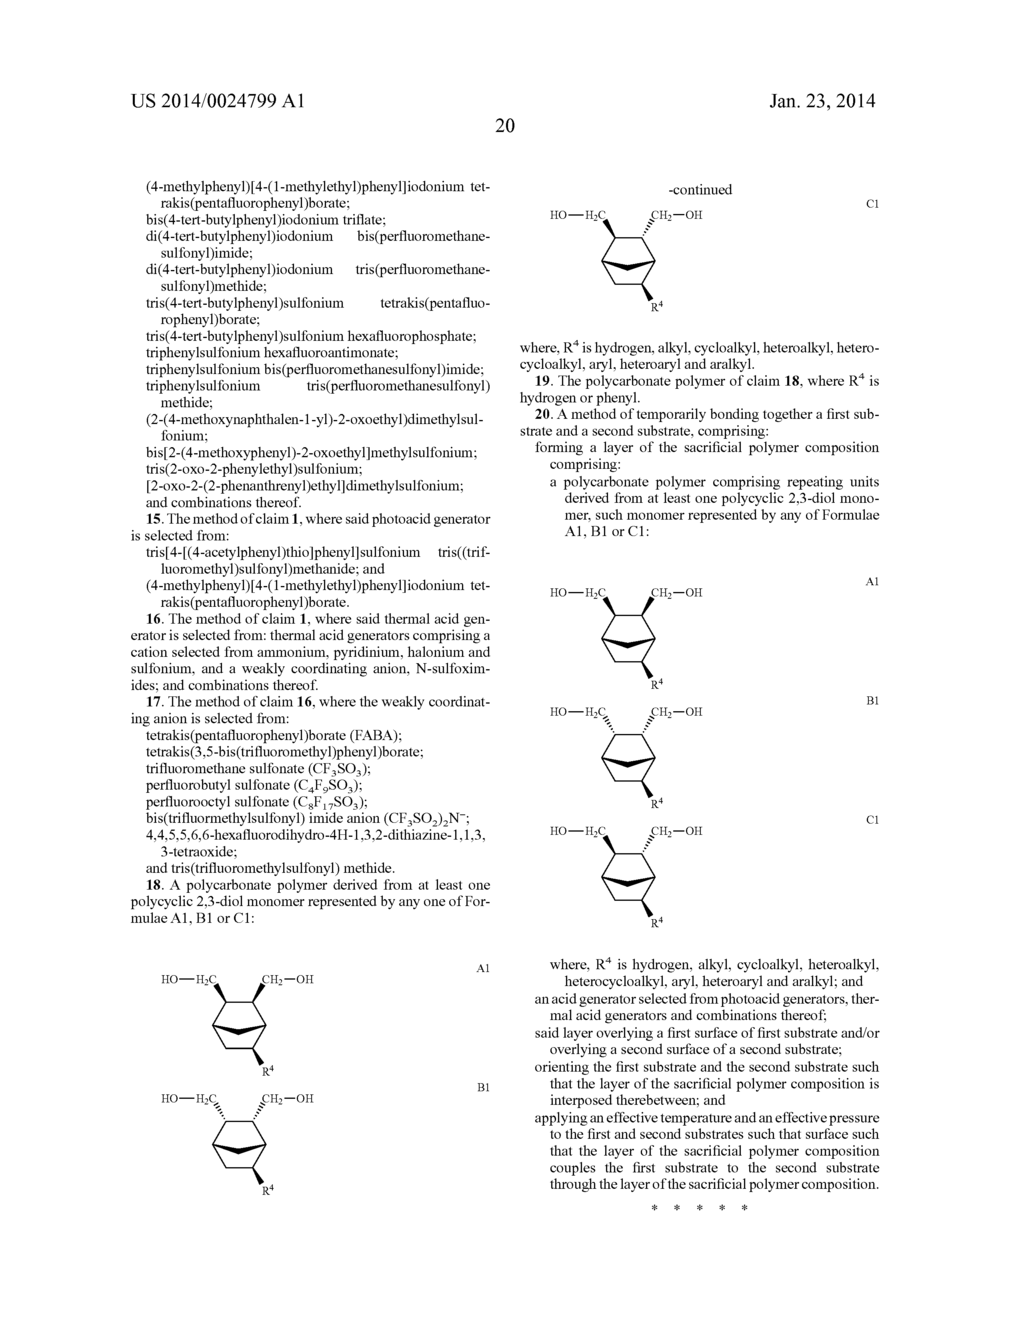 Sacrificial Polymer Compositions Including Polycarbonates Having Repeat     Units Derived From Stereospecific Polycyclic 2,3-Diol Monomers - diagram, schematic, and image 24